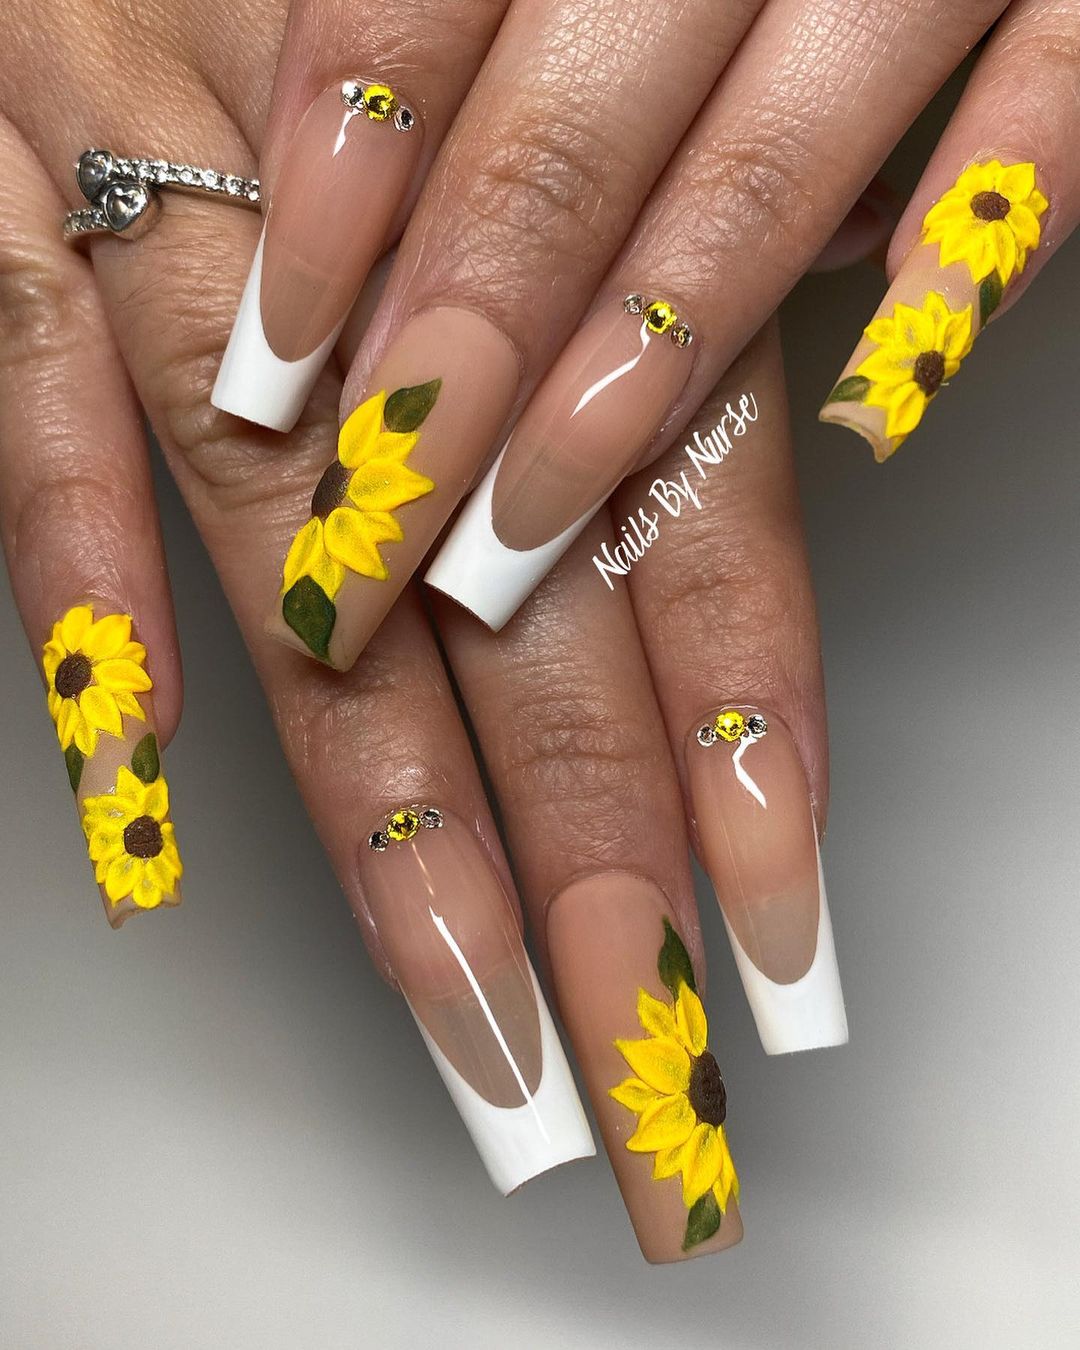 Long French Manicure with Sunflower